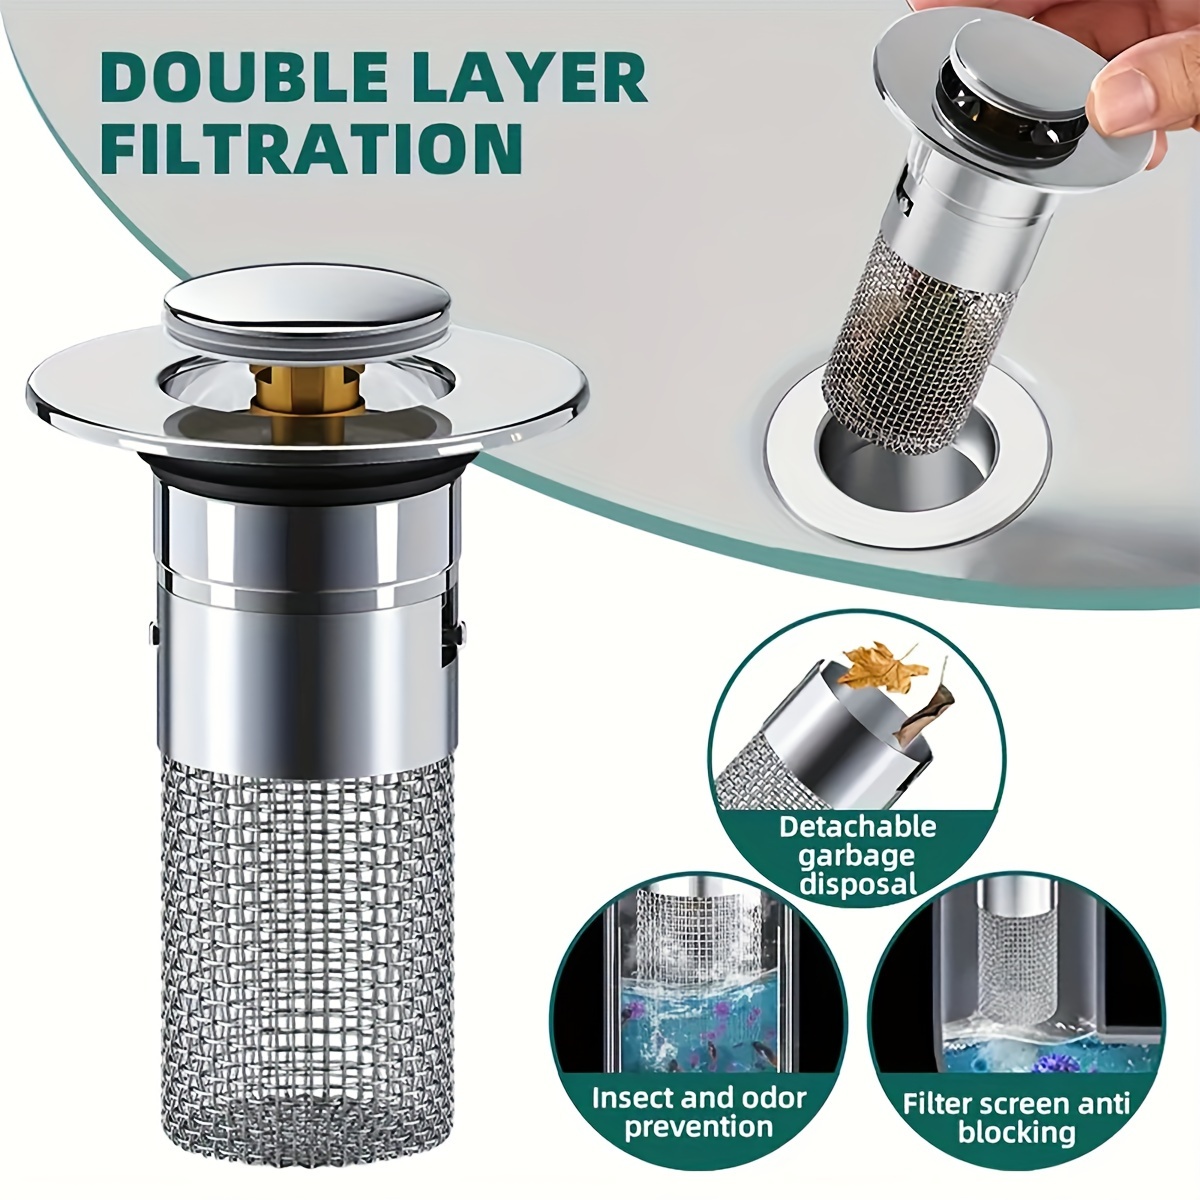 

Stainless Steel Bathroom Sink Stopper With Anti-odor Brass Core - Pop-up Drain Strainer, Fits 1-1.4" Aperture